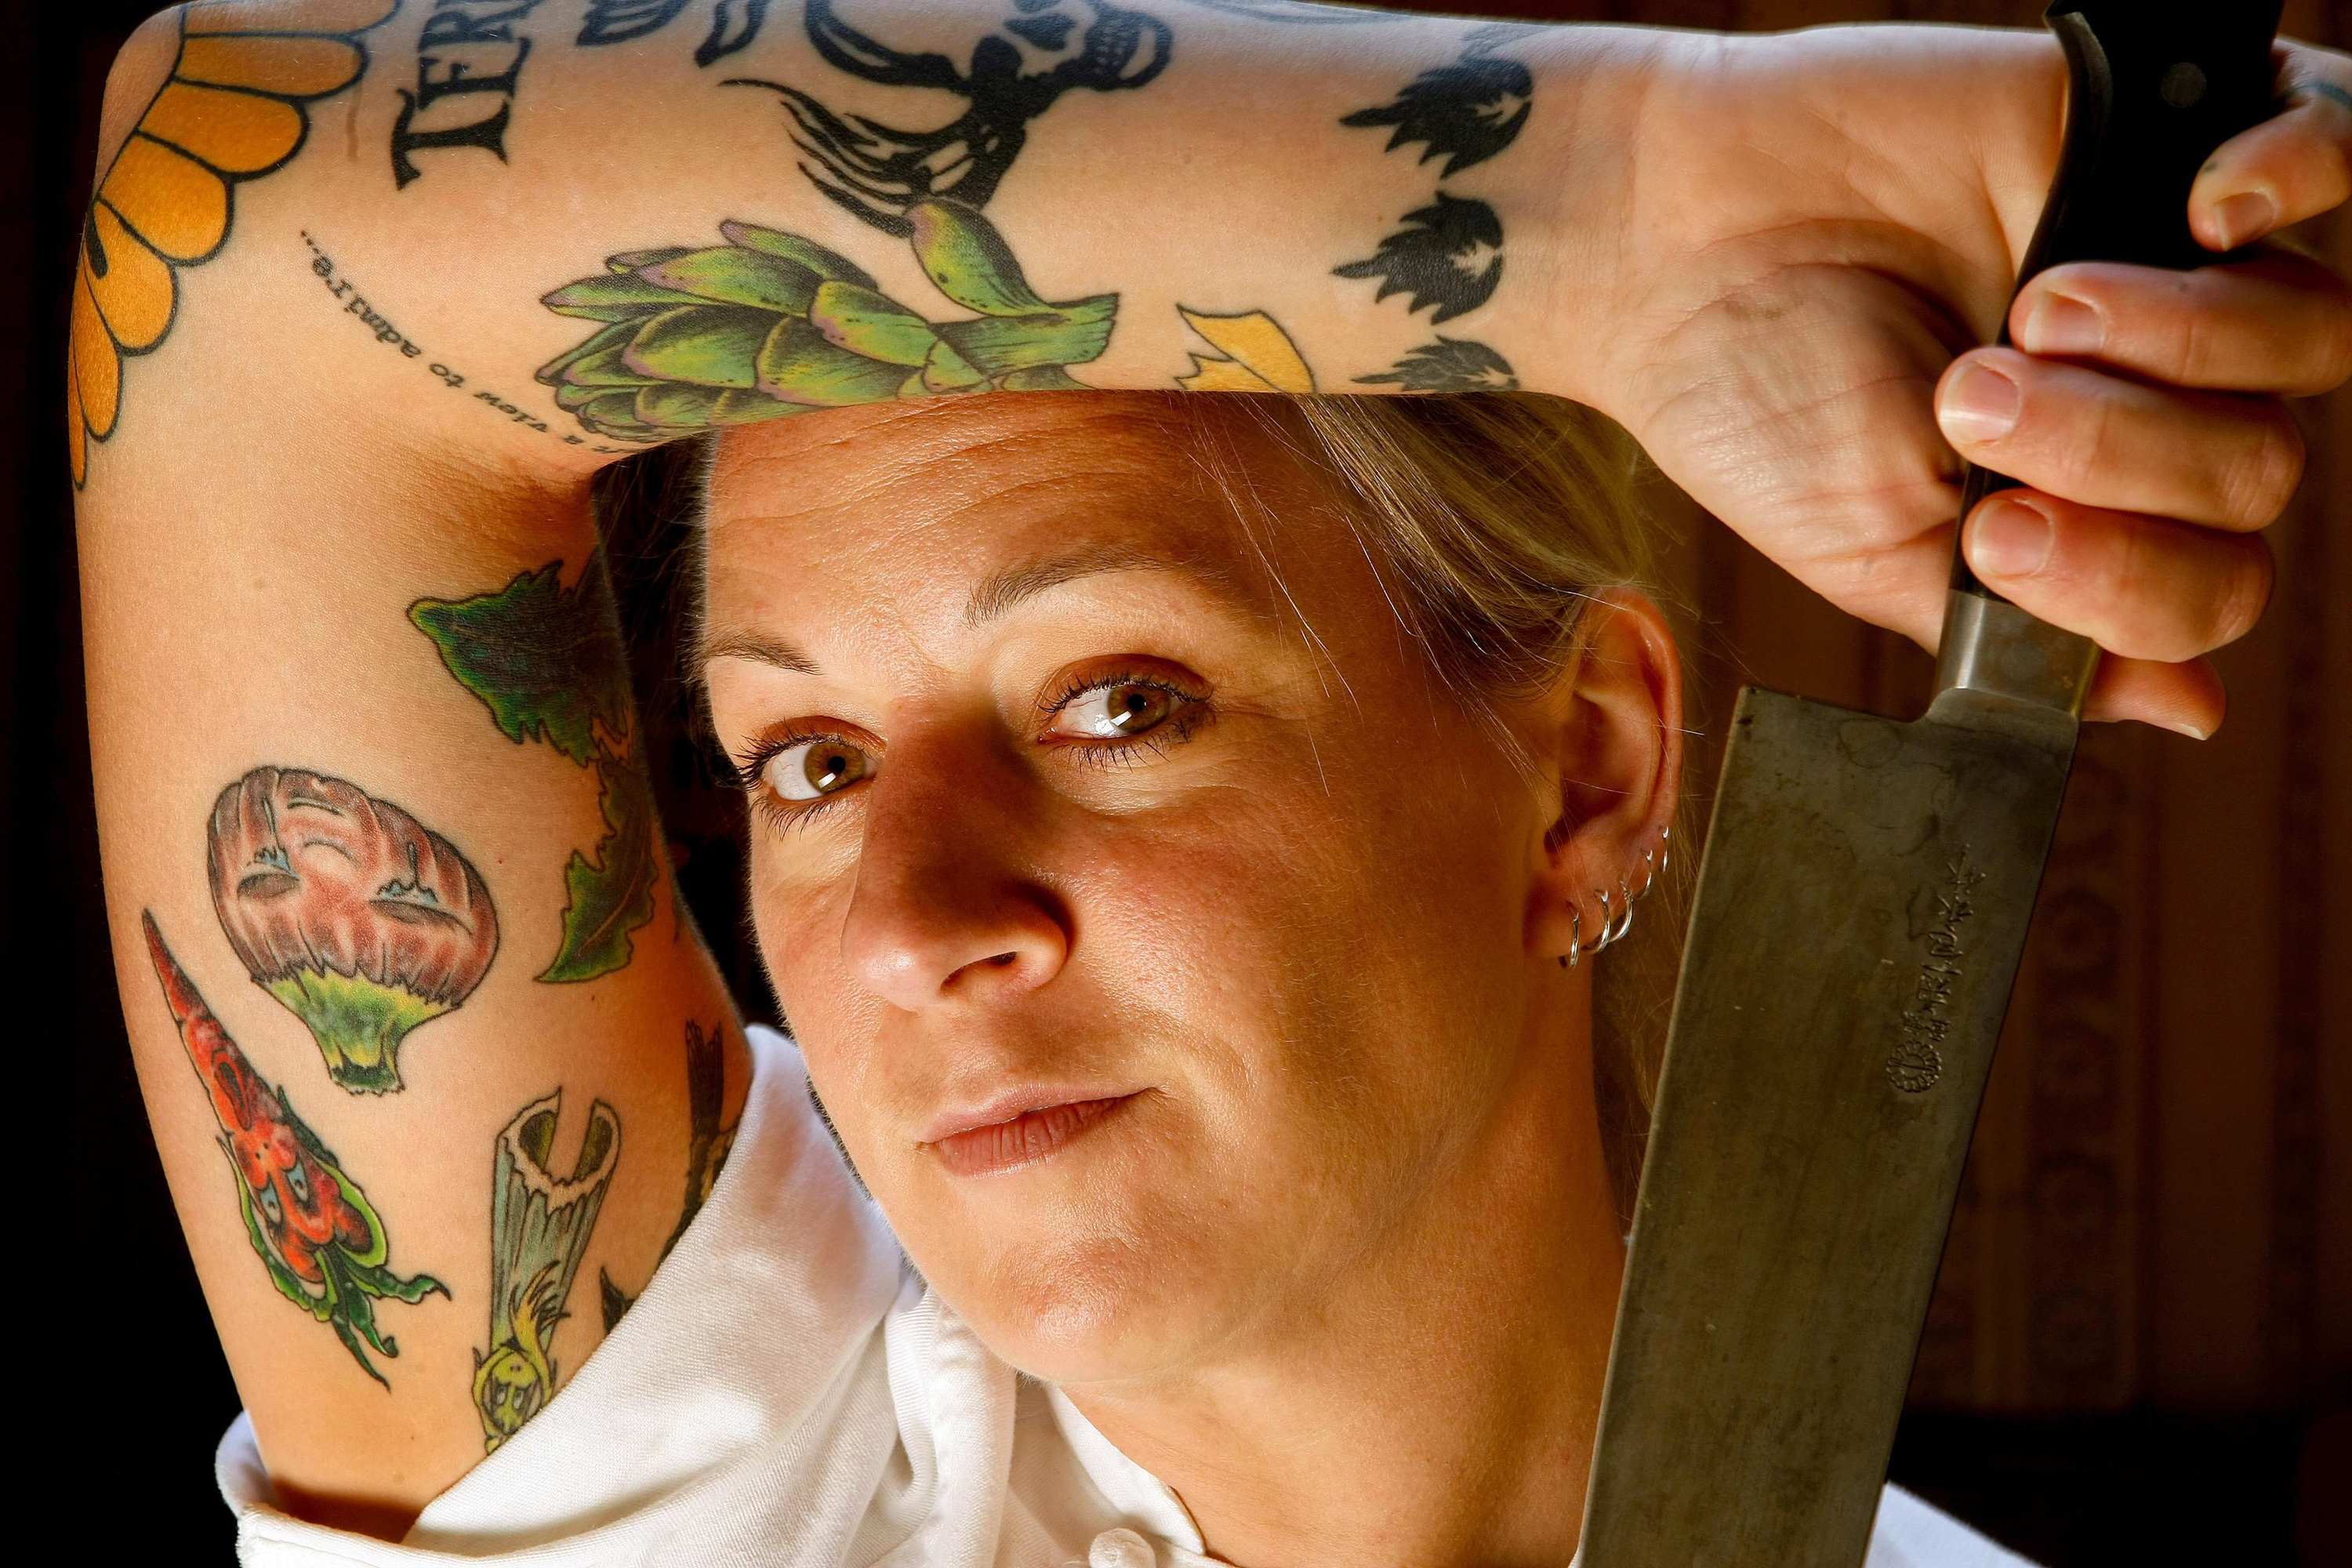 Inspirational Top 10 chefs with Tattoos - They are Different! - Top 10 Chefs  in the World